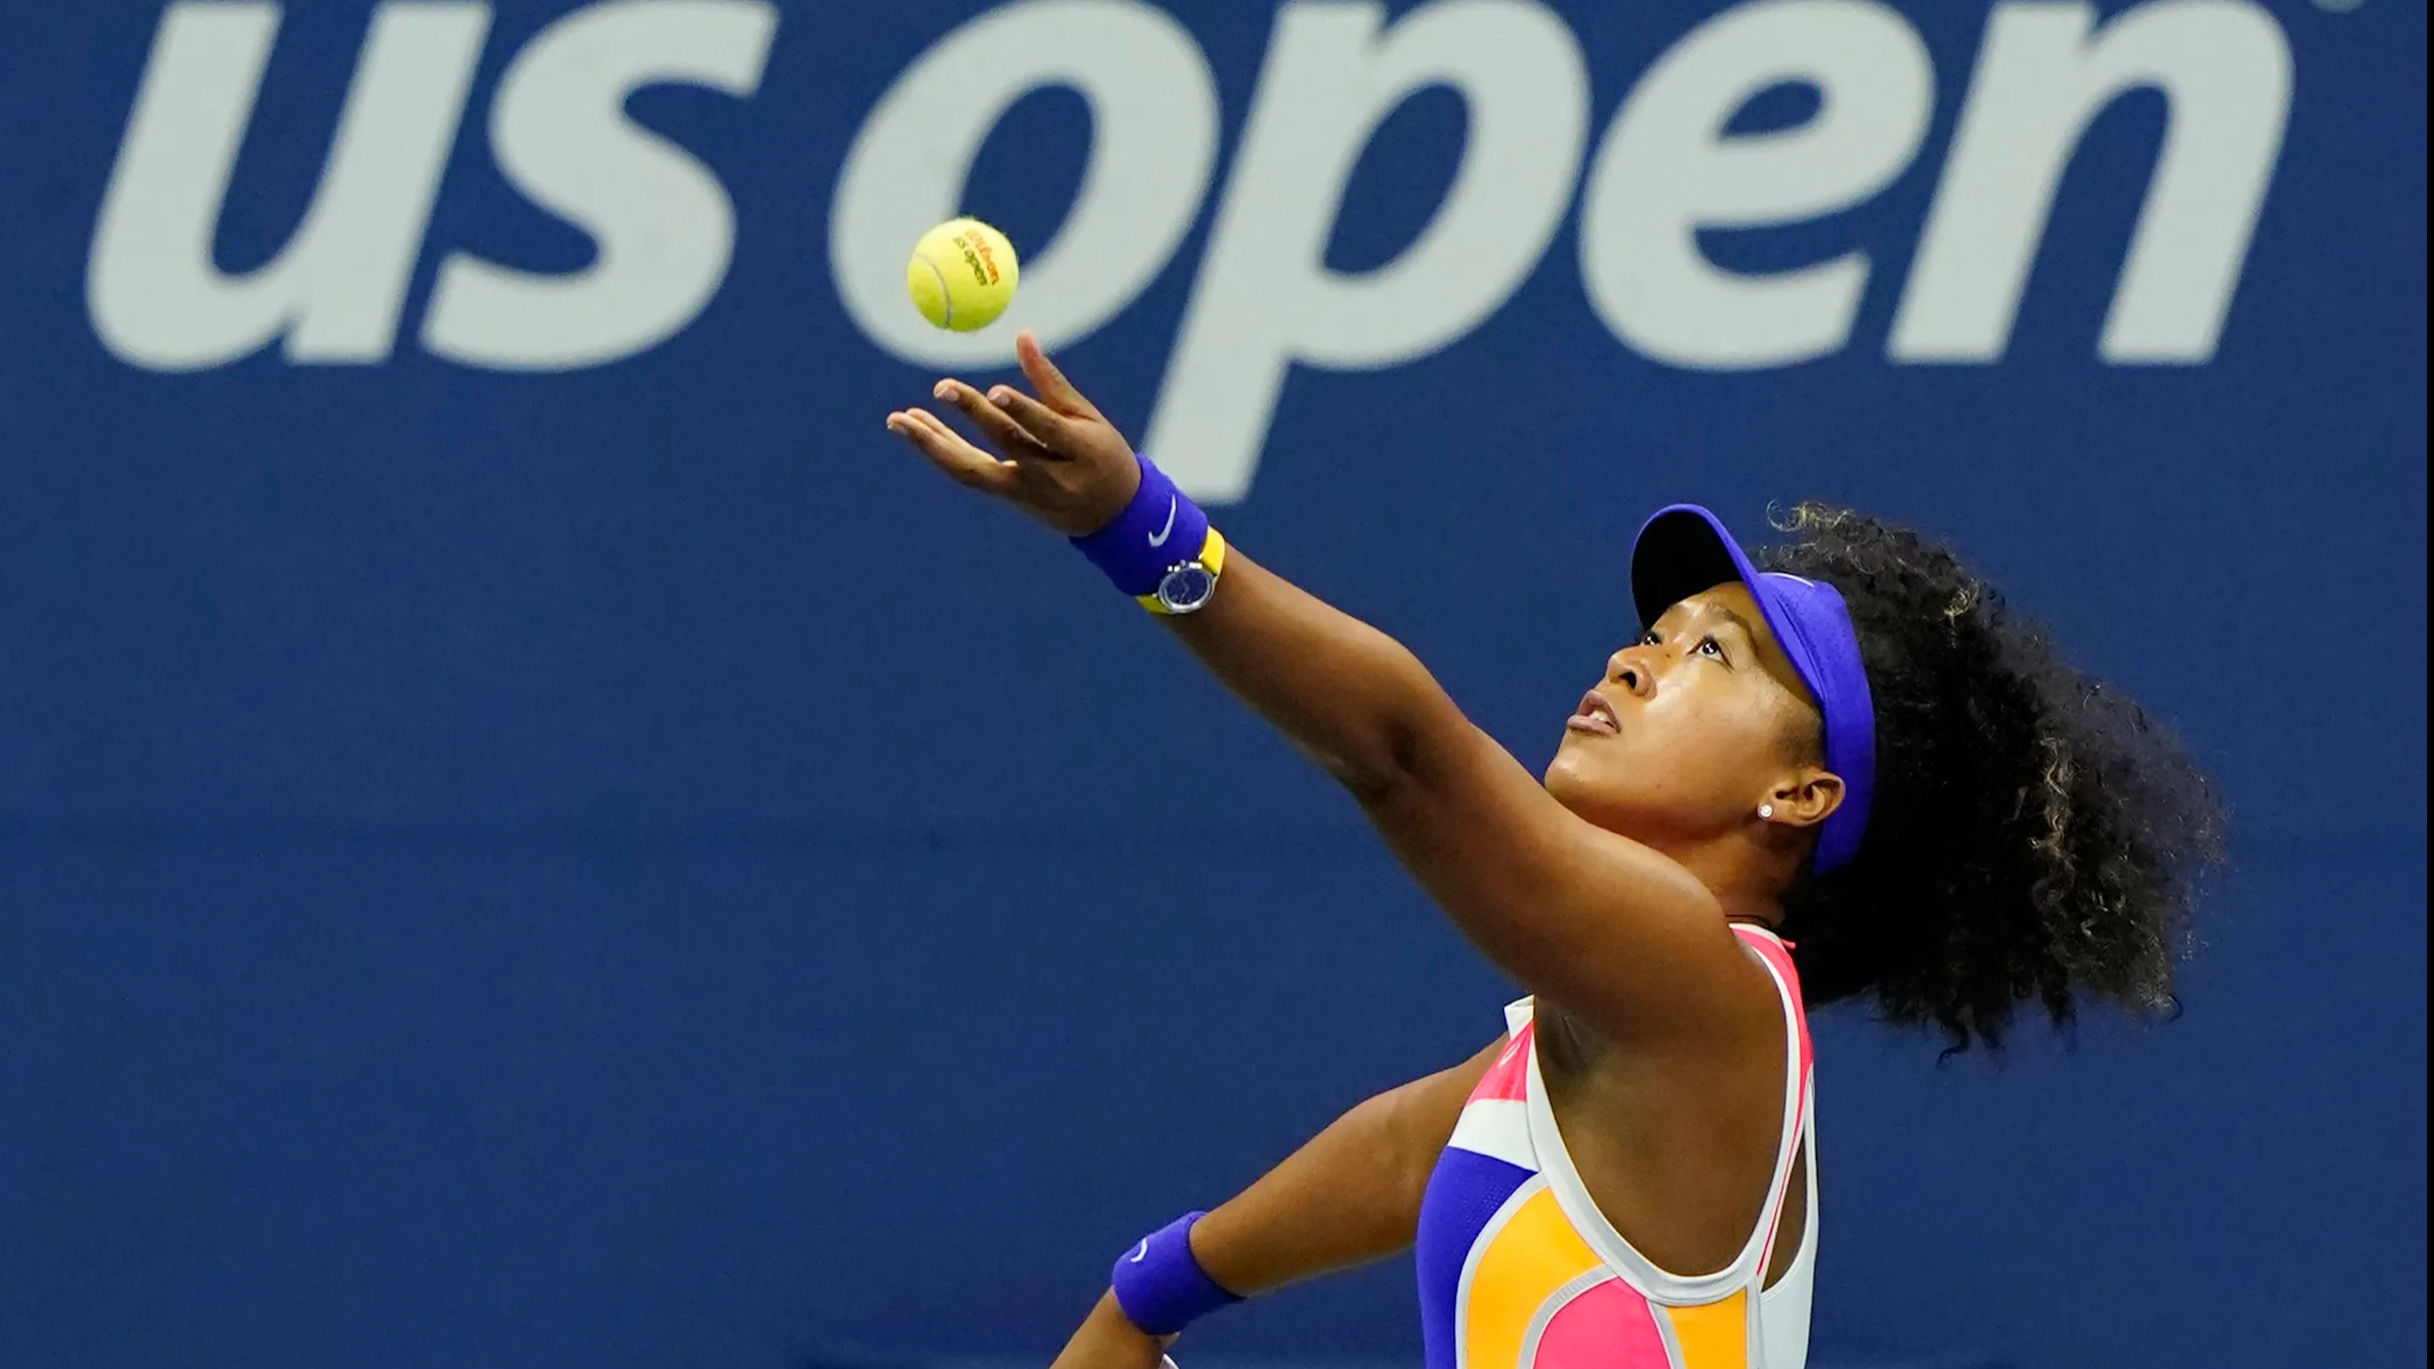 After US Open win, Naomi Osaka hints at more active participation against racial injustice